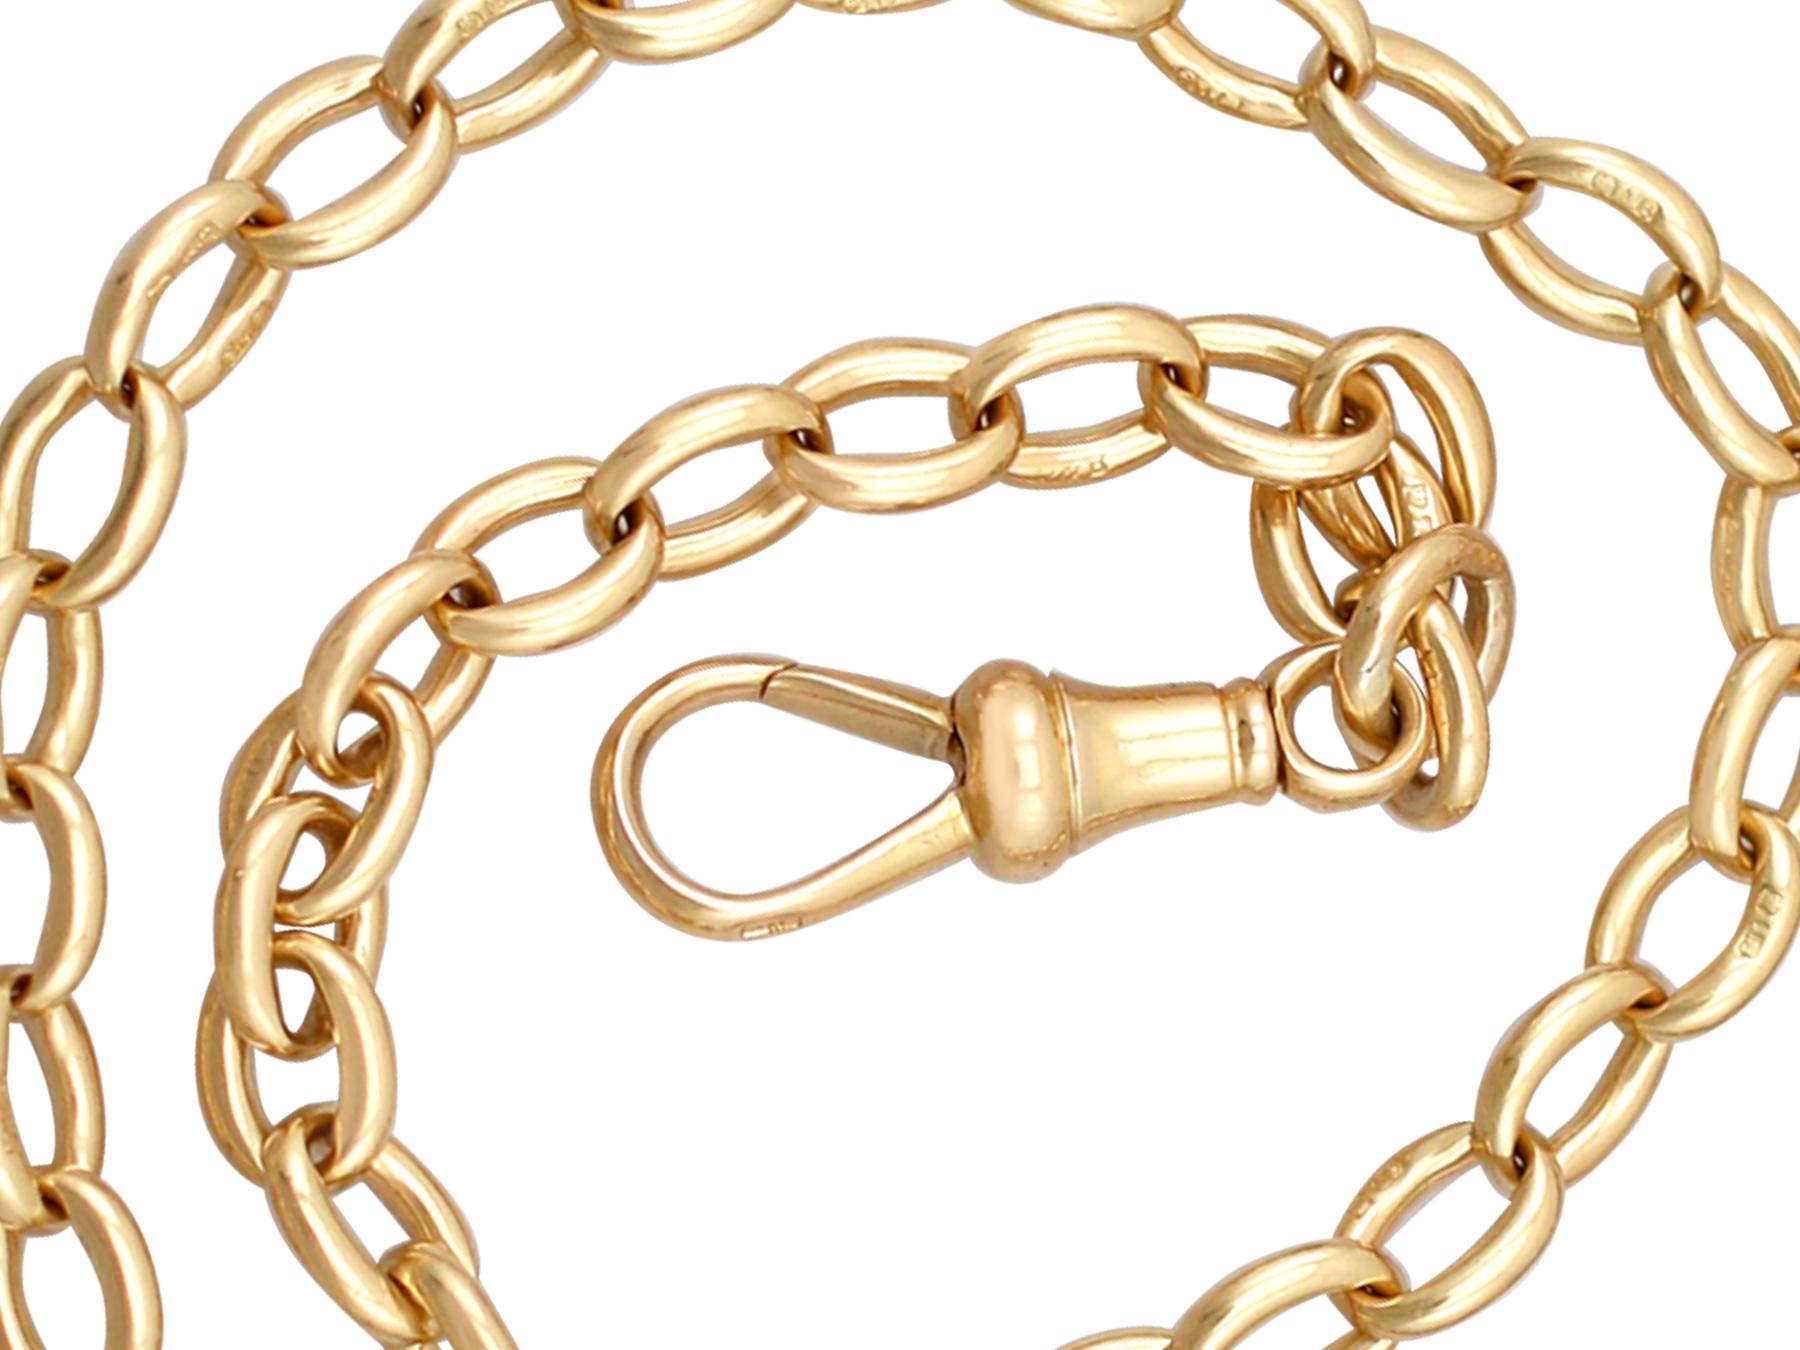 An exceptional antique Victorian 18 karat yellow gold Albert chain; part of our diverse antique jewellery and estate jewelry collections.

This exceptional, fine and impressive antique watch chain has been crafted in 18k yellow gold.

The Albert